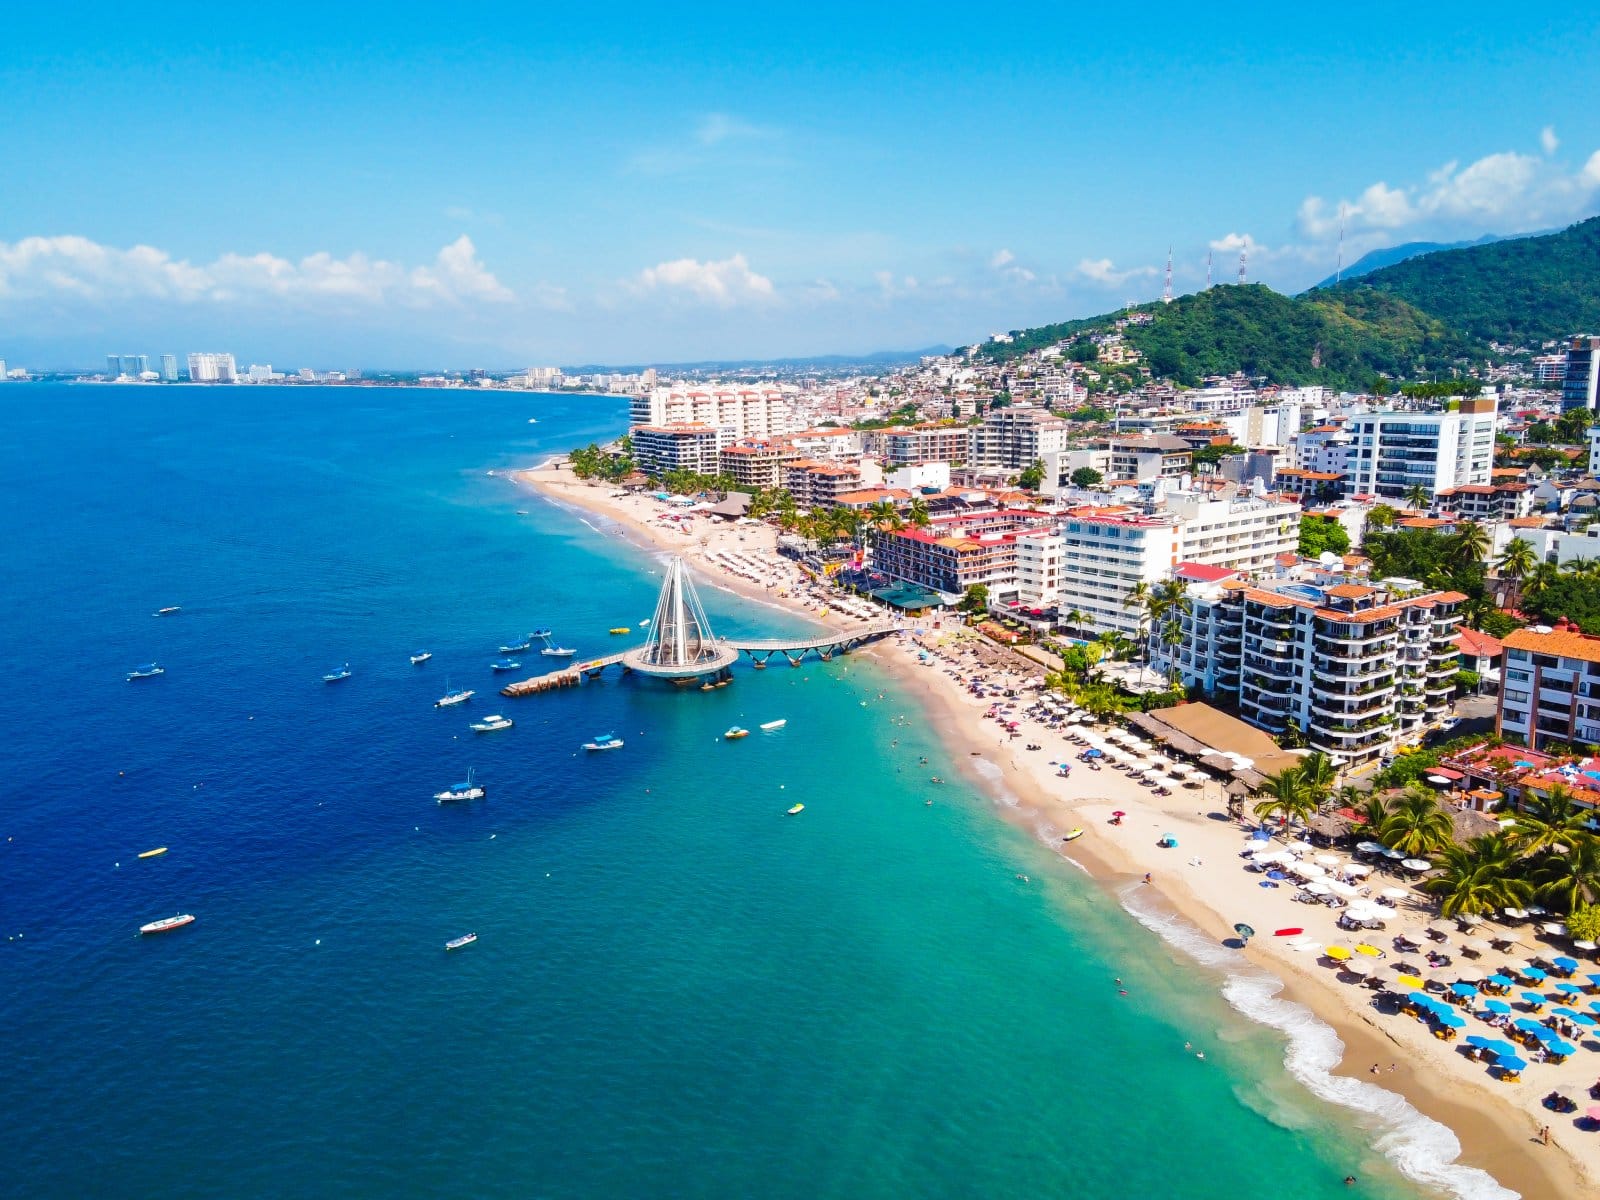 <p class="wp-caption-text">Image Credit: Shutterstock / Hello Cinthia</p>  <p><span>Puerto Vallarta offers sandy beaches and a lively expat community. Beachfront condos are available for $1,500 a month, and RV parks welcome guests at about $600. For a quirky option, stay in a palapa-roofed casita.</span></p>